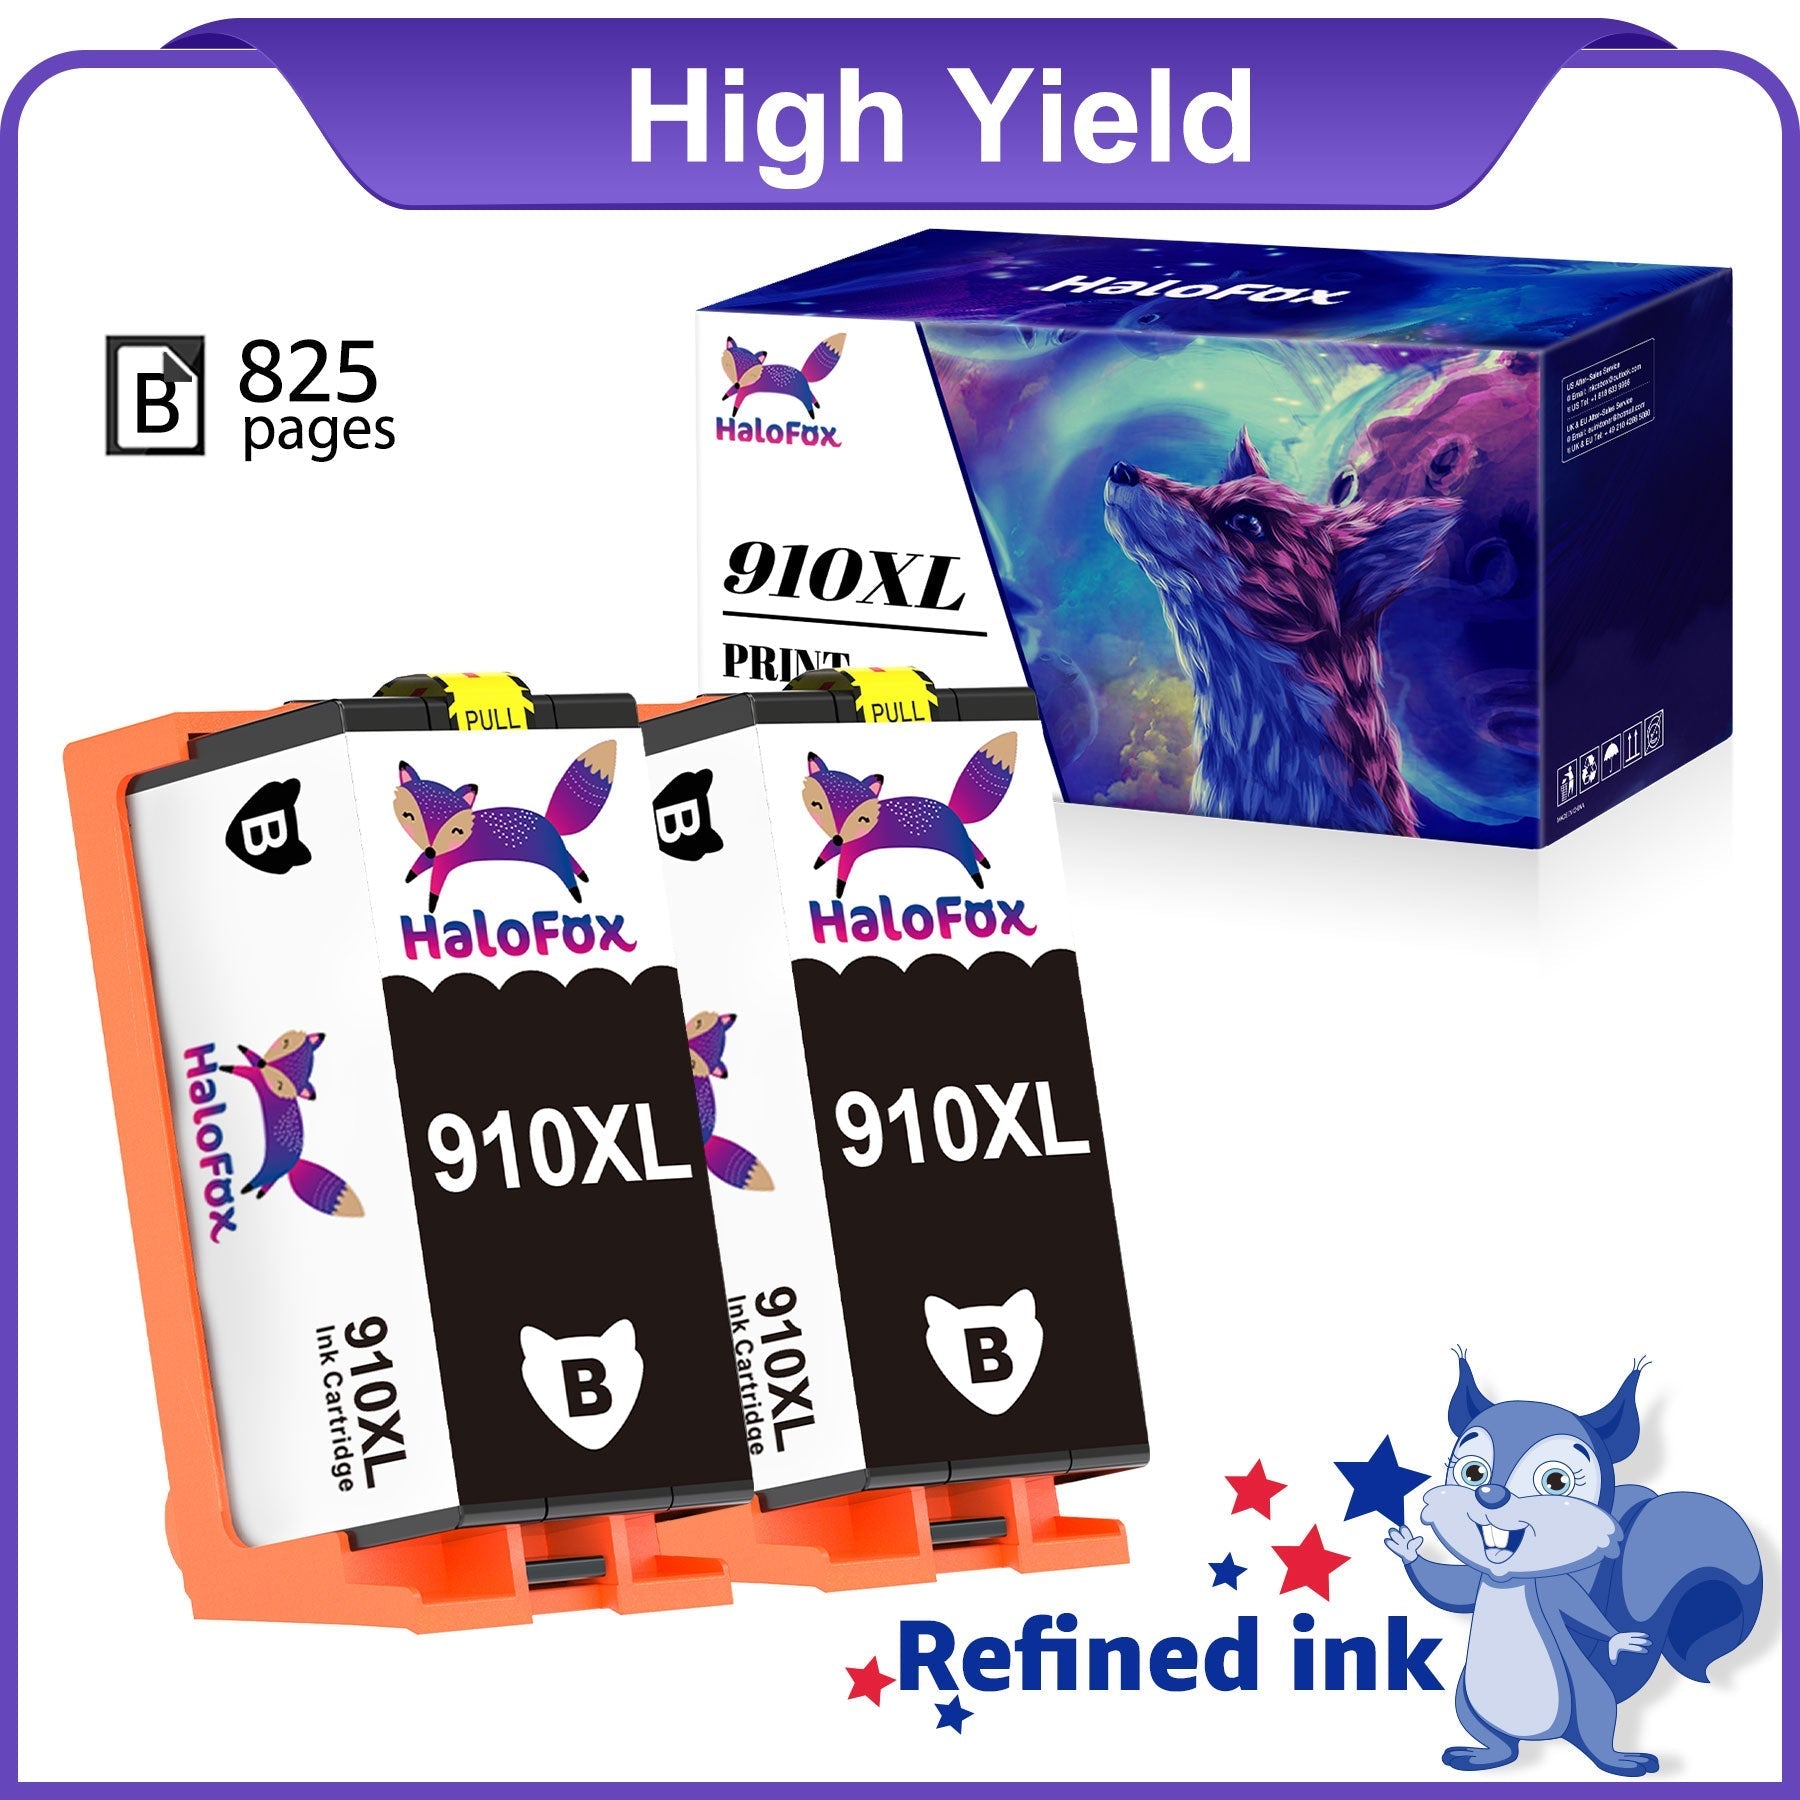 Halofox 910 XL Black Ink Replacement for HP 910 Ink Cartridge (2 Pack)